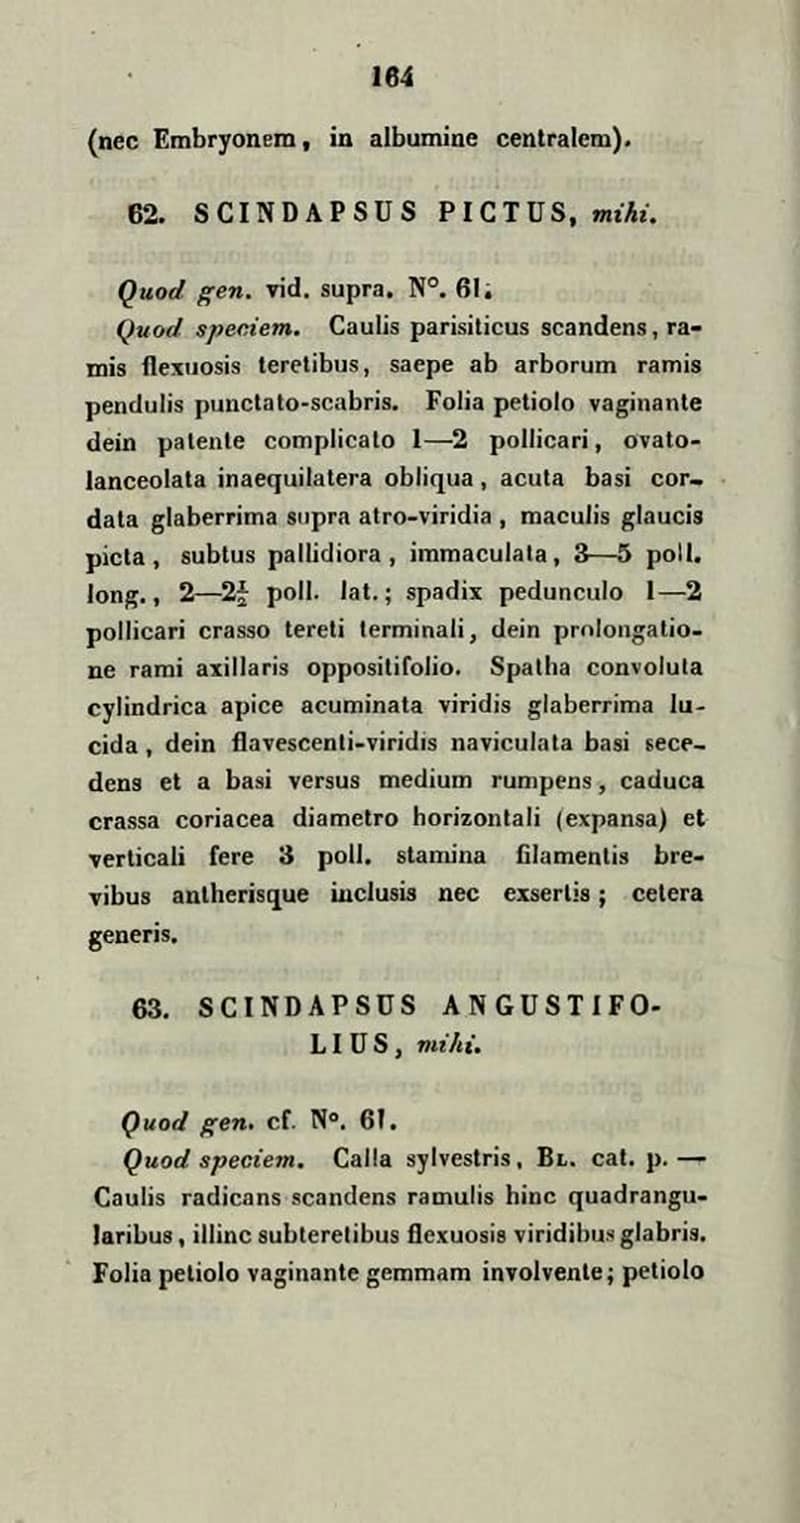 Page excerpt from a Dutch 1842 text showing the first mention of Scindapsus pictus in print